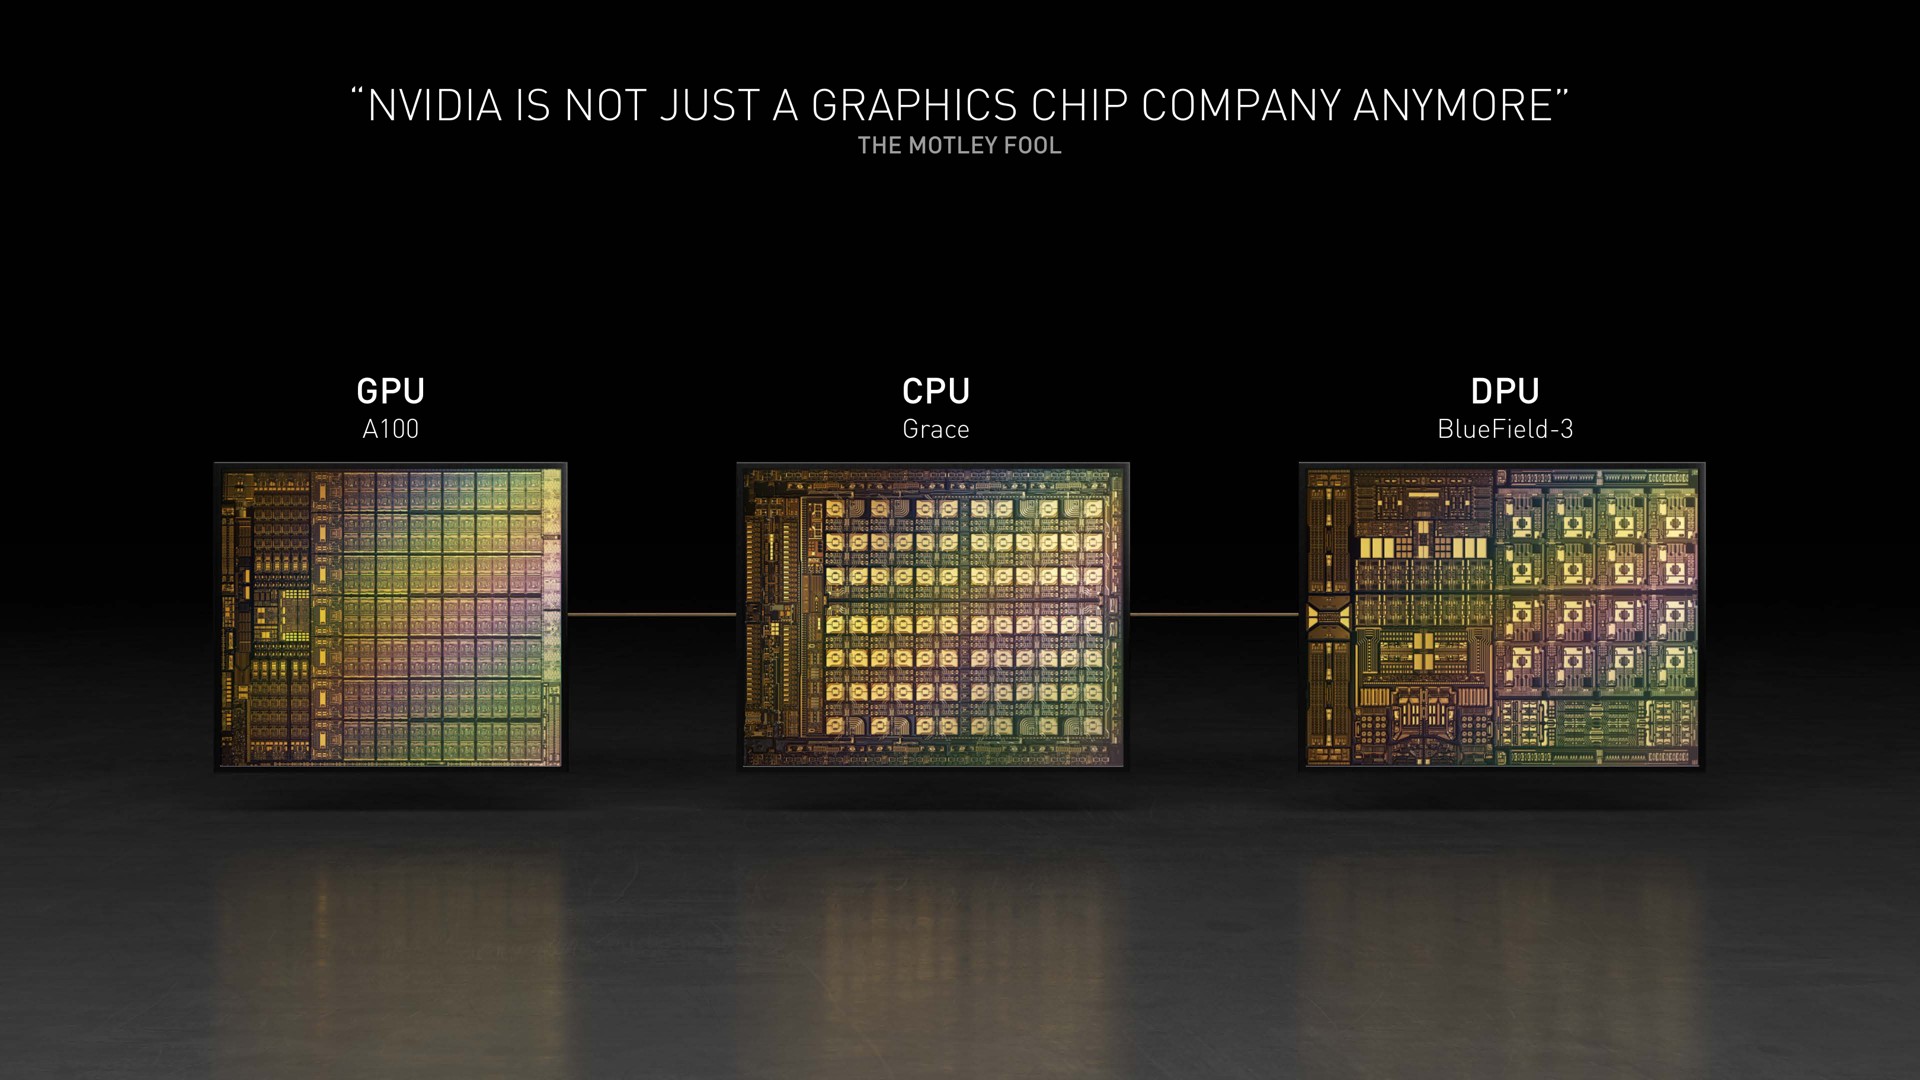 is not just a graphics chip company | NVIDIA